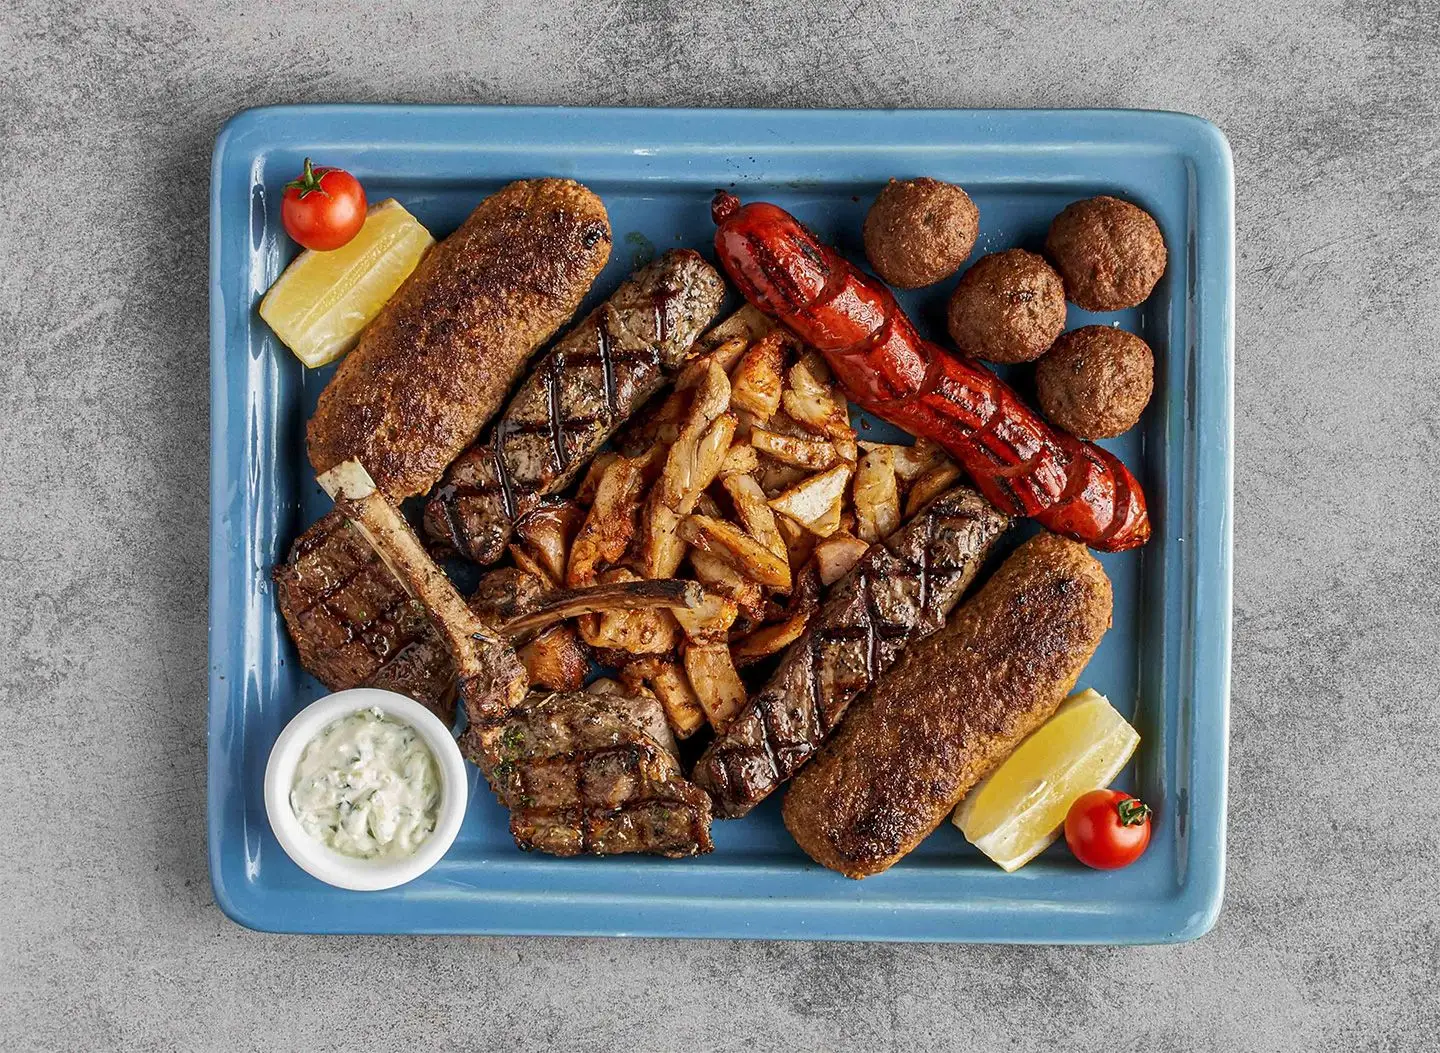 Mixed Grilled Meat Platter for 2 Pax